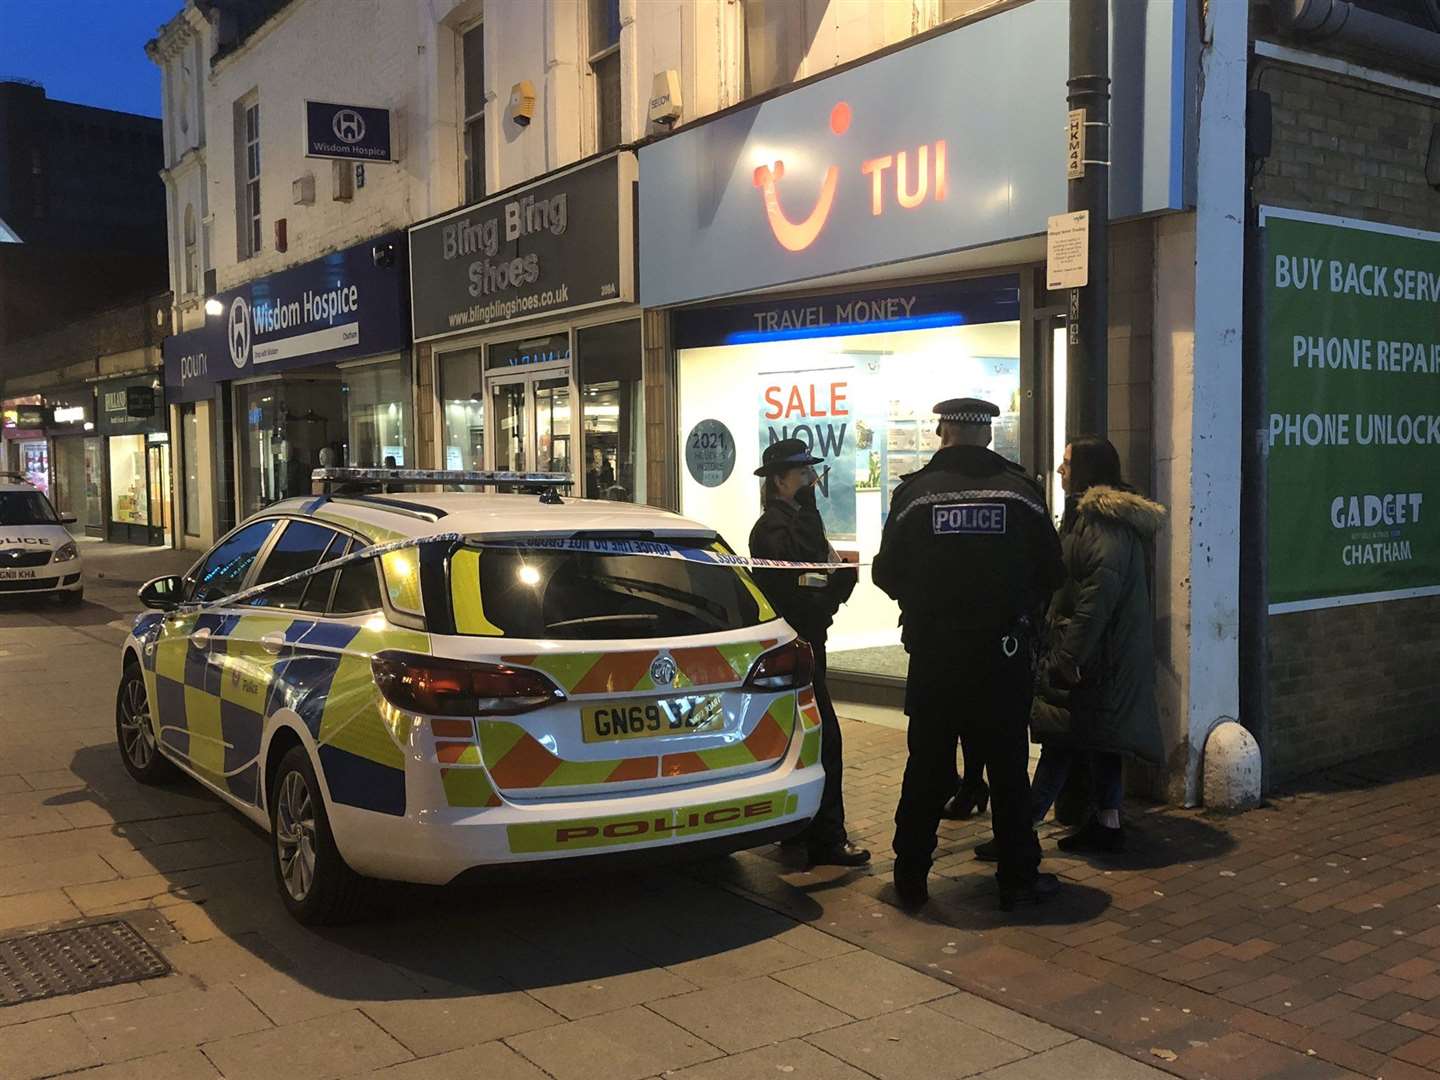 A man will now appear in court accused of armed robbery charges. Picture: UKNIP